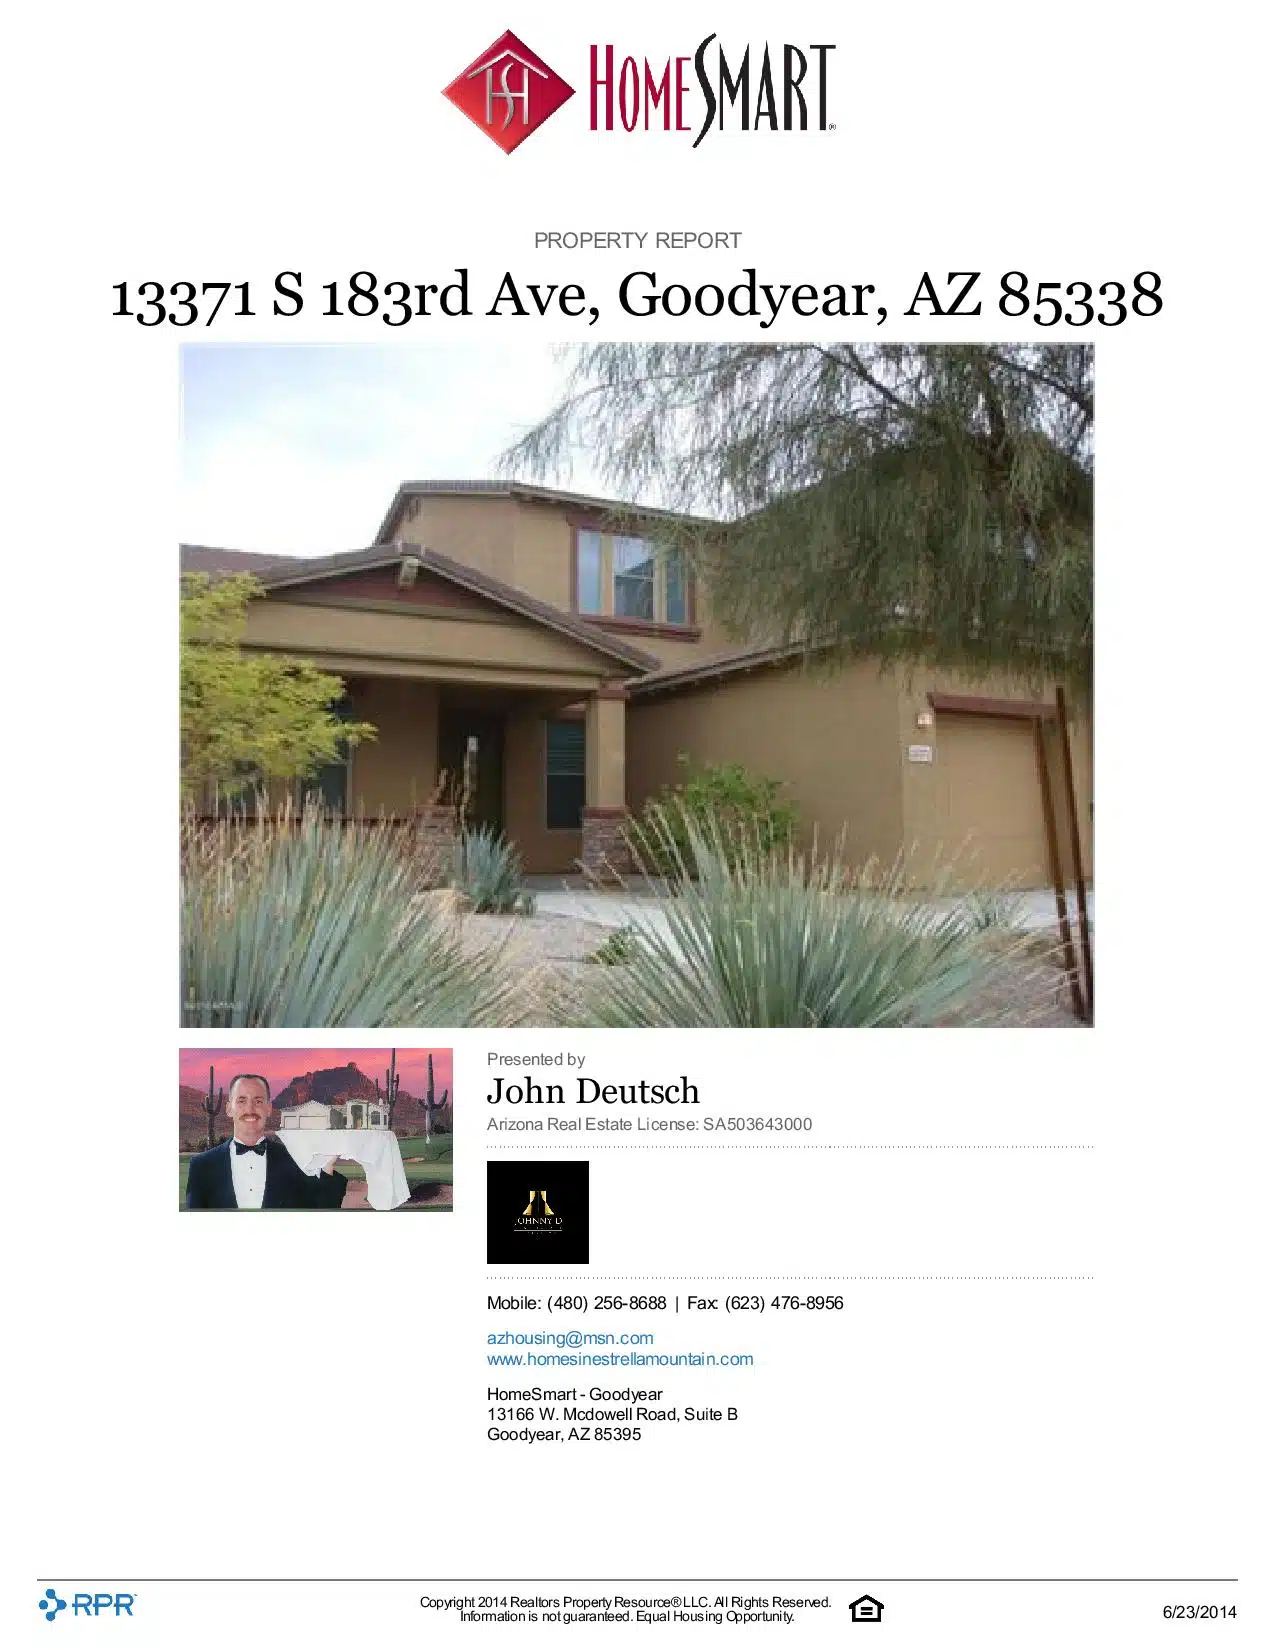 13371-S-183rd-Ave-Goodyear-AZ-85338-page-001